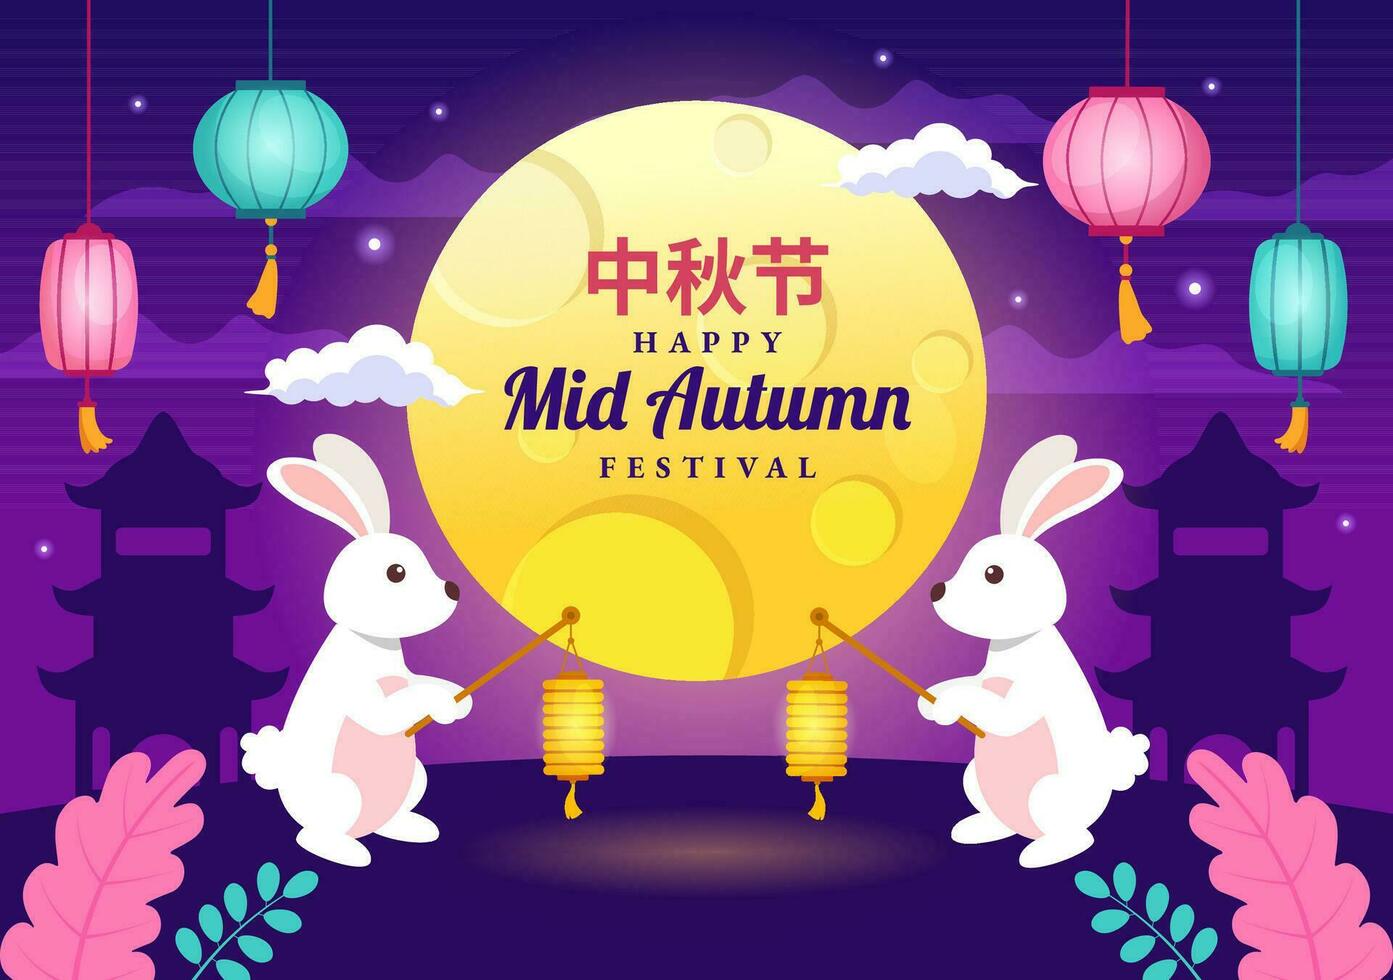 Happy Mid Autumn Festival Vector Illustration with Rabbits Carrying Lanterns and Enjoy Mooncake Celebrate on the Night of the Full Moon Templates